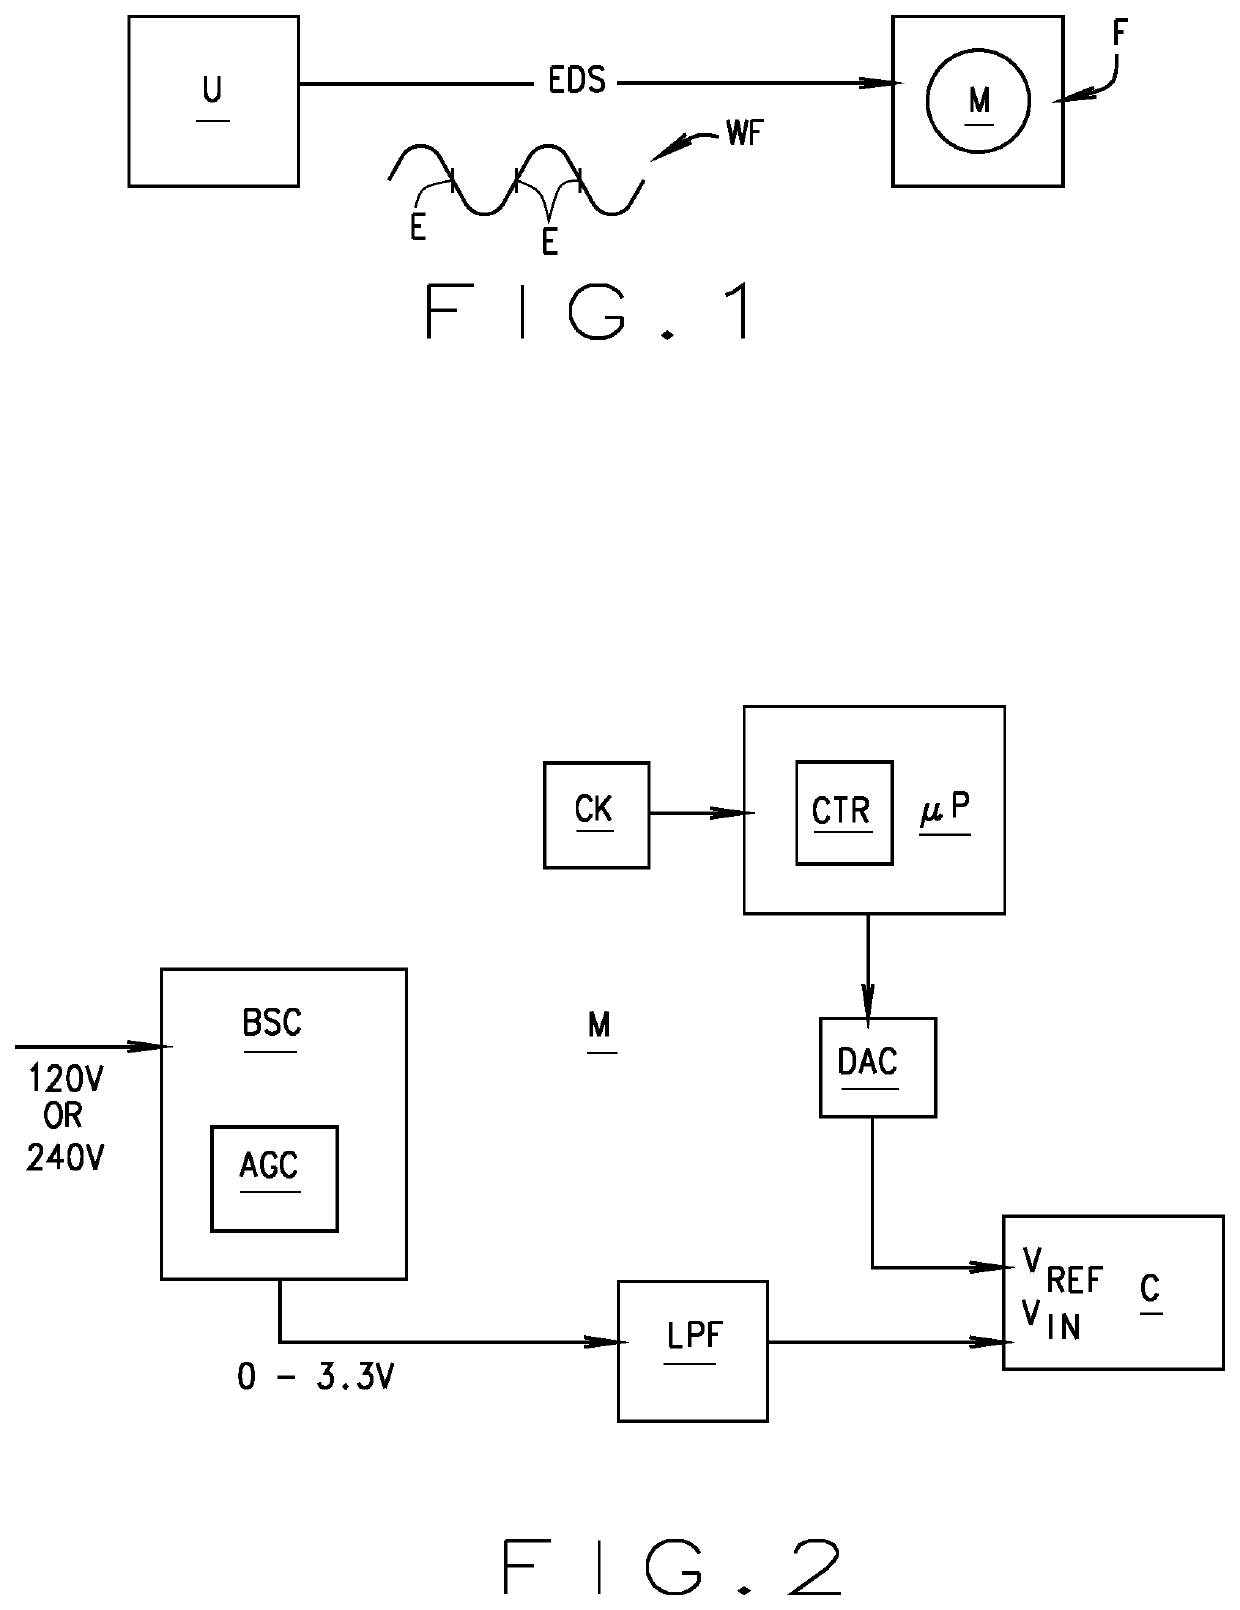 Synthetic analog-to-digital converter (ADC) for legacy twacs meters